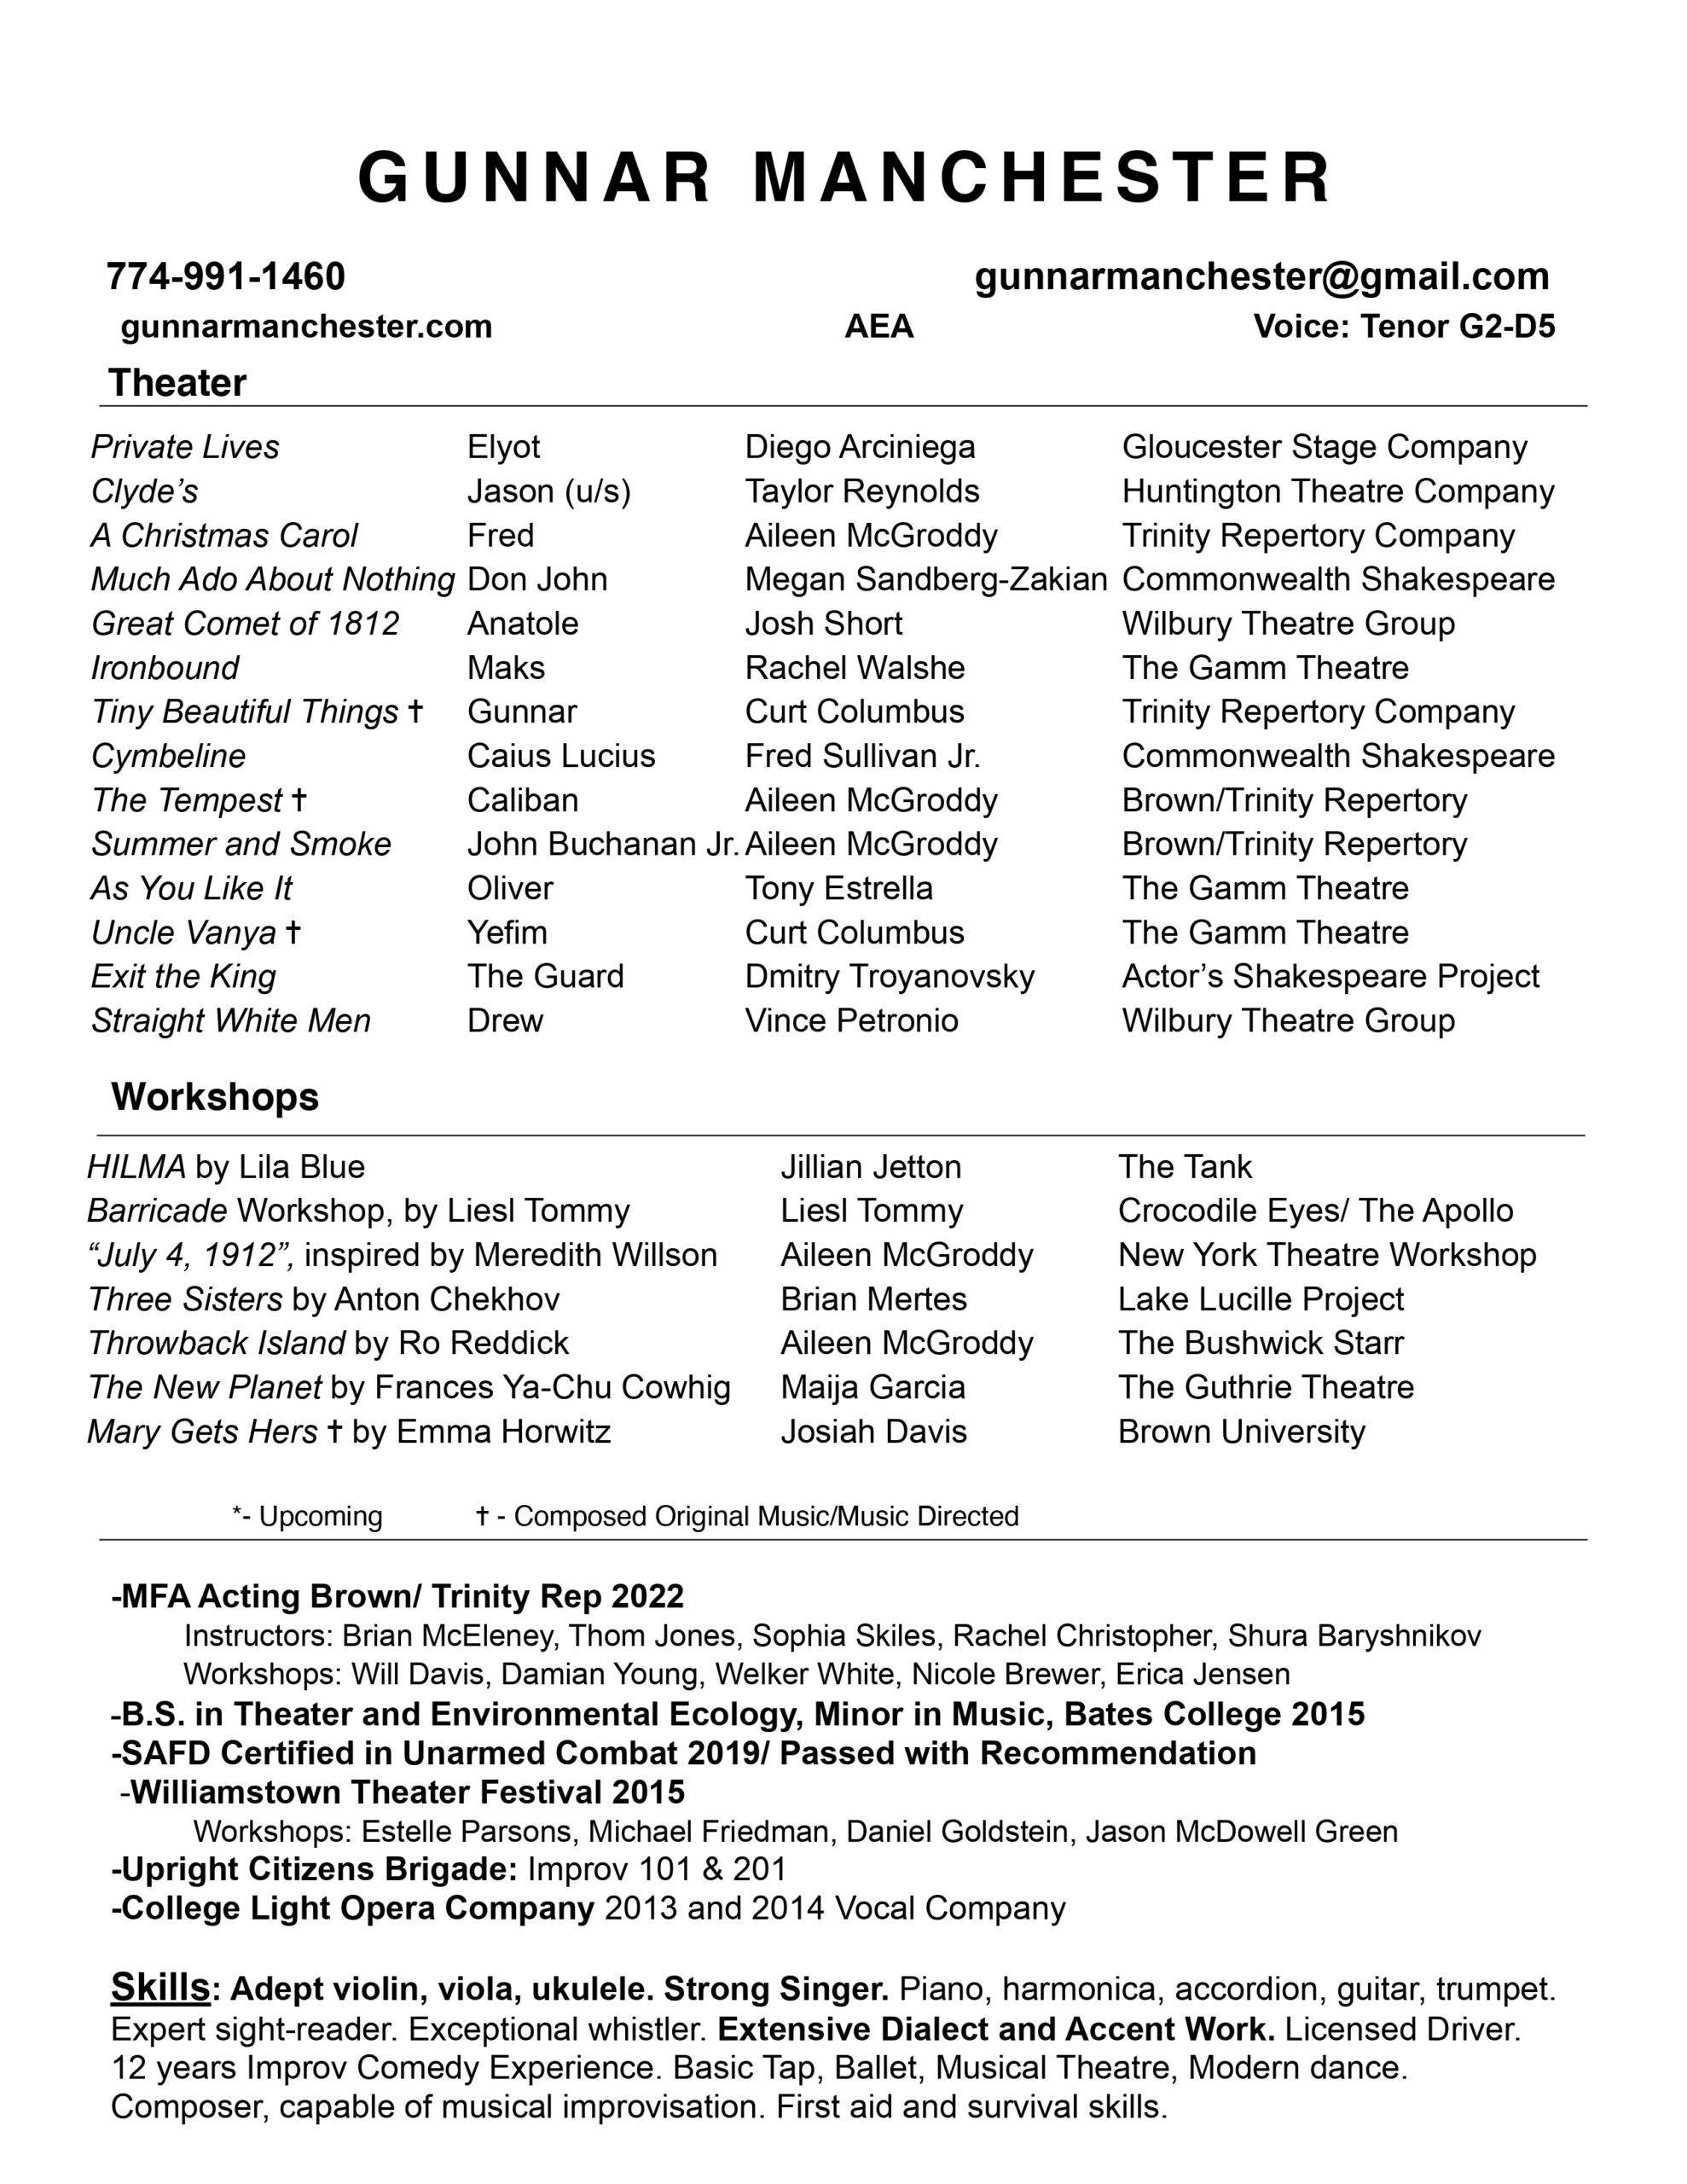 GUNNAR MANCHESTER - THEATRE RESUME 2023_page-0001 (1)